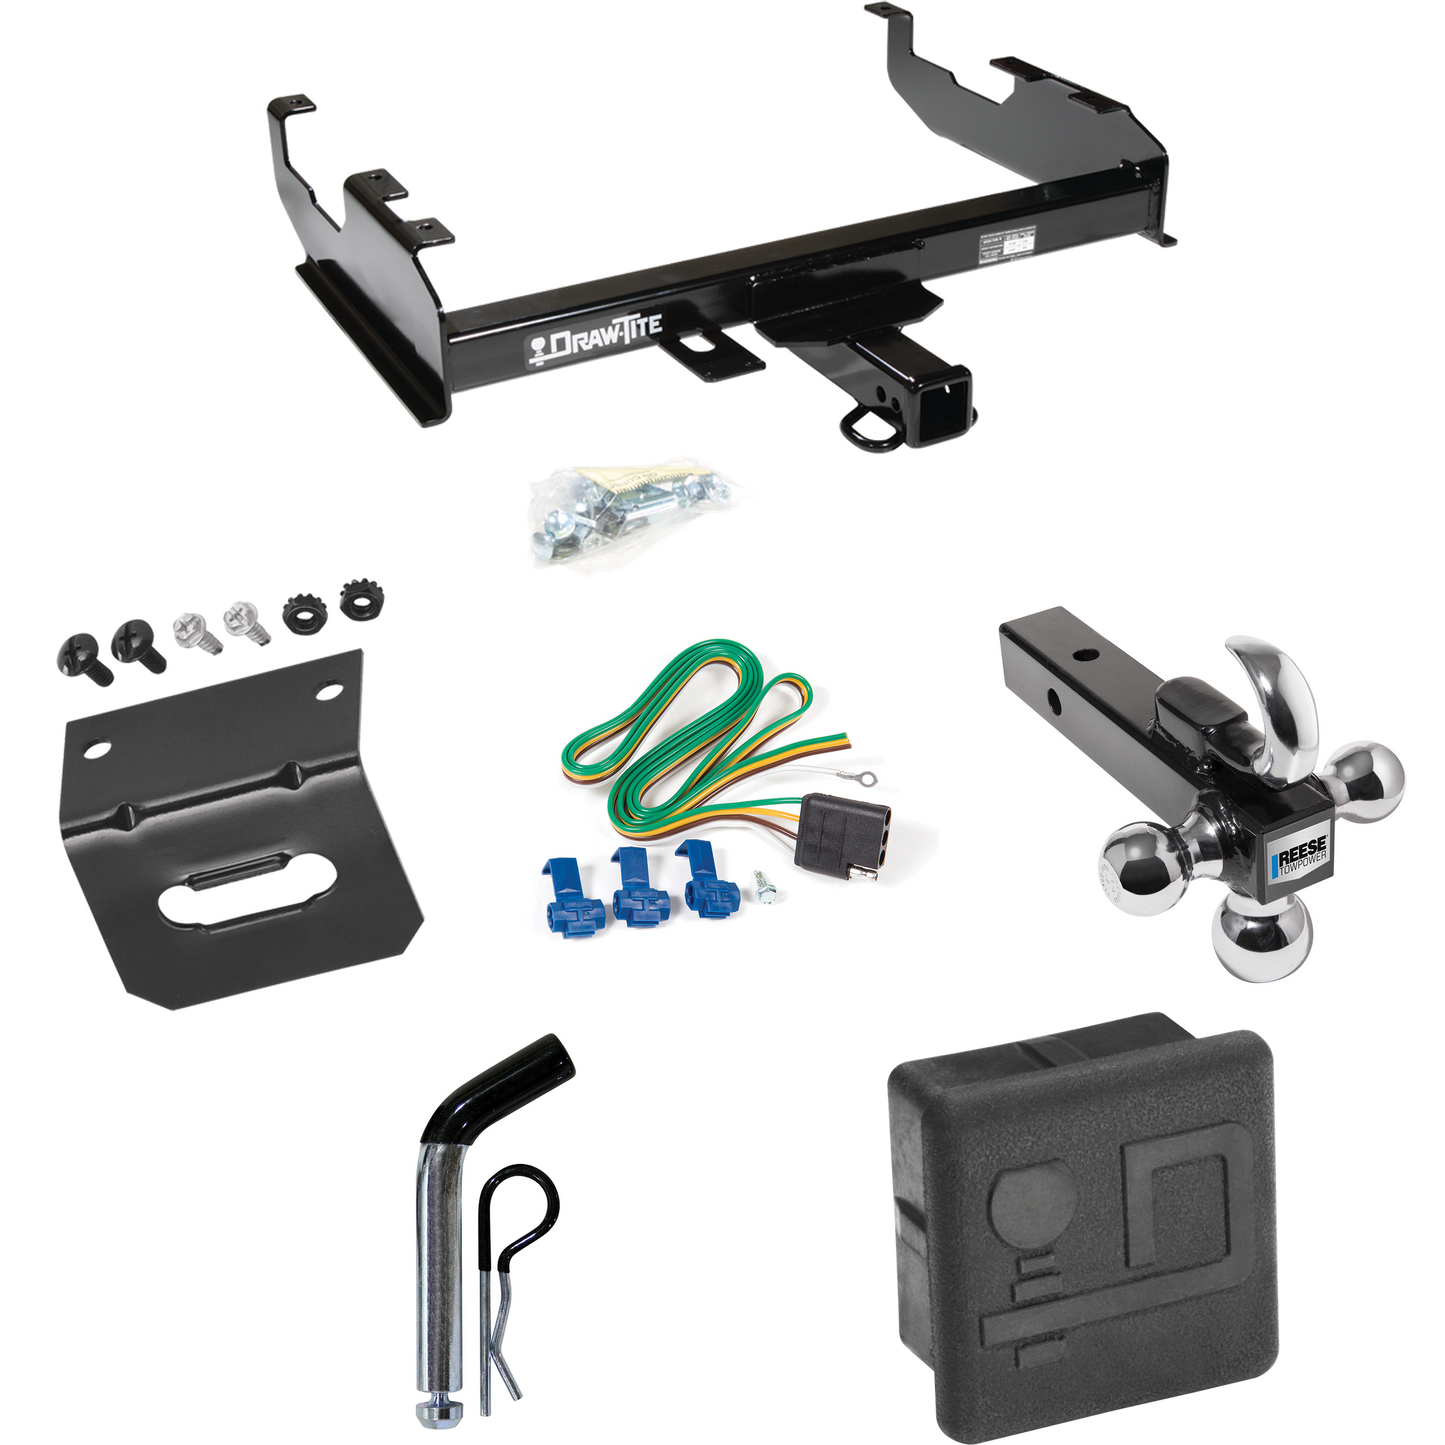 Fits 1999-2000 Ford F-350 Super Duty Trailer Hitch Tow PKG w/ 4-Flat Wiring + Triple Ball Ball Mount 1-7/8" & 2" & 2-5/16" Trailer Balls w/ Tow Hook + Pin/Clip + Wiring Bracket + Hitch Cover (For Cab & Chassis, w/34" Wide Frames Models) By Draw-Tite